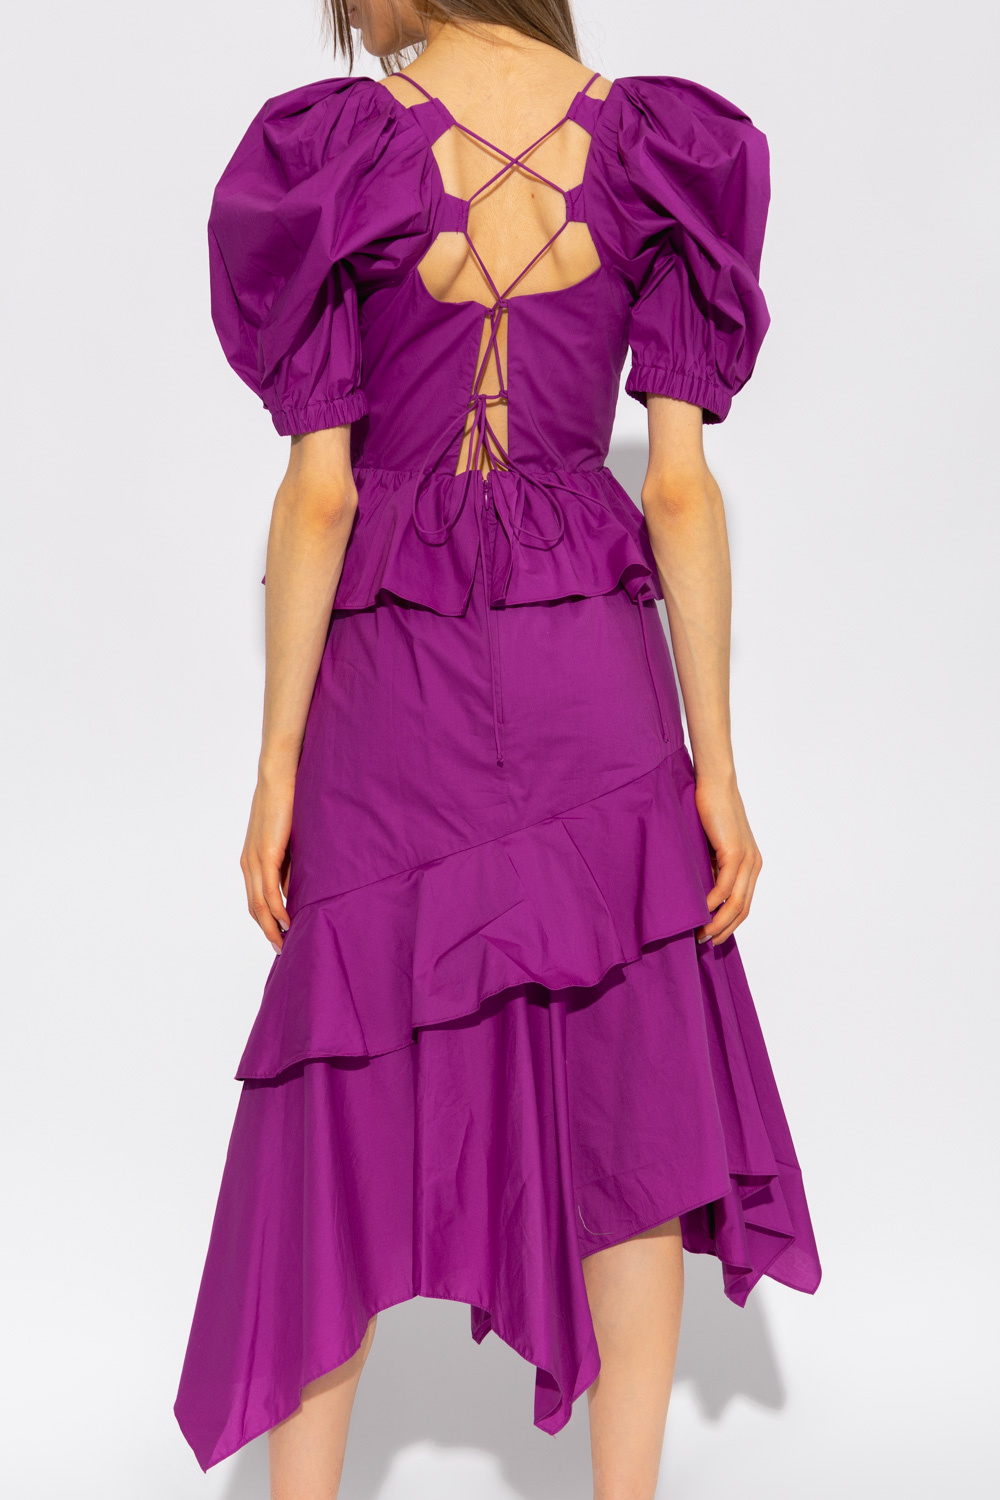 Ulla Johnson ‘Marie’ dress with puff sleeves